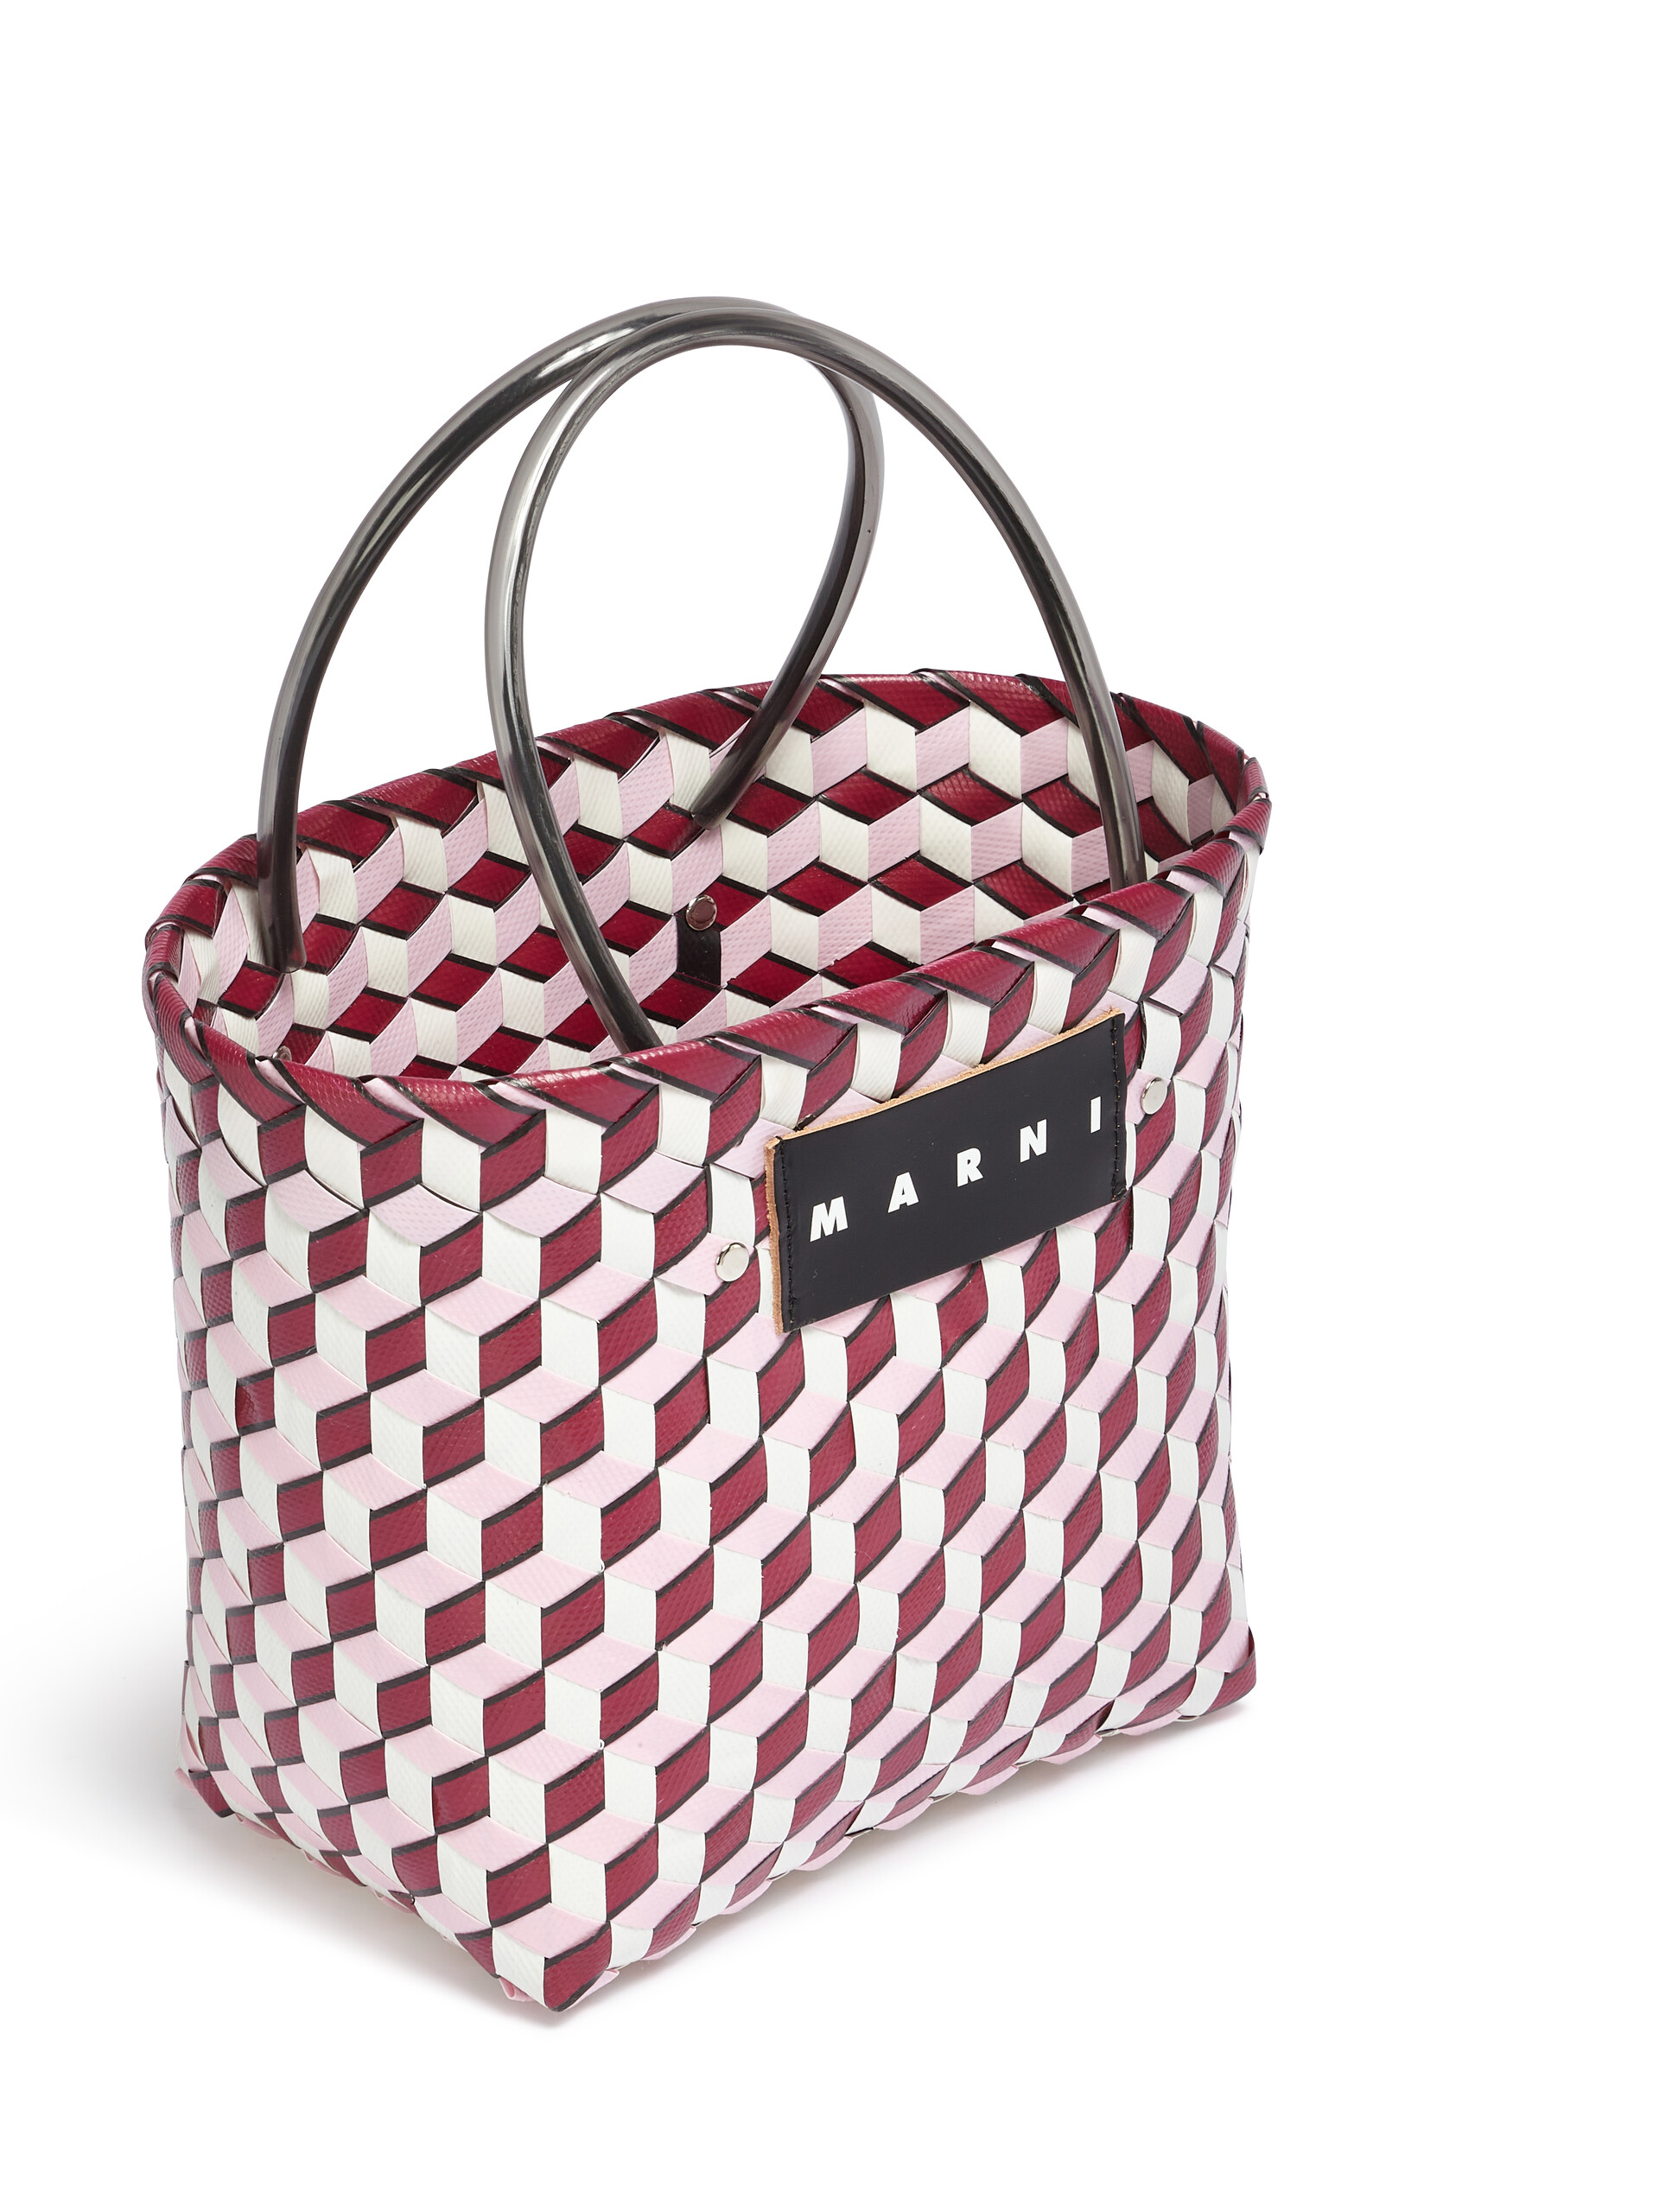 MARNI MARKET 3D BAG in burgundy cube woven material - Shopping Bags - Image 4